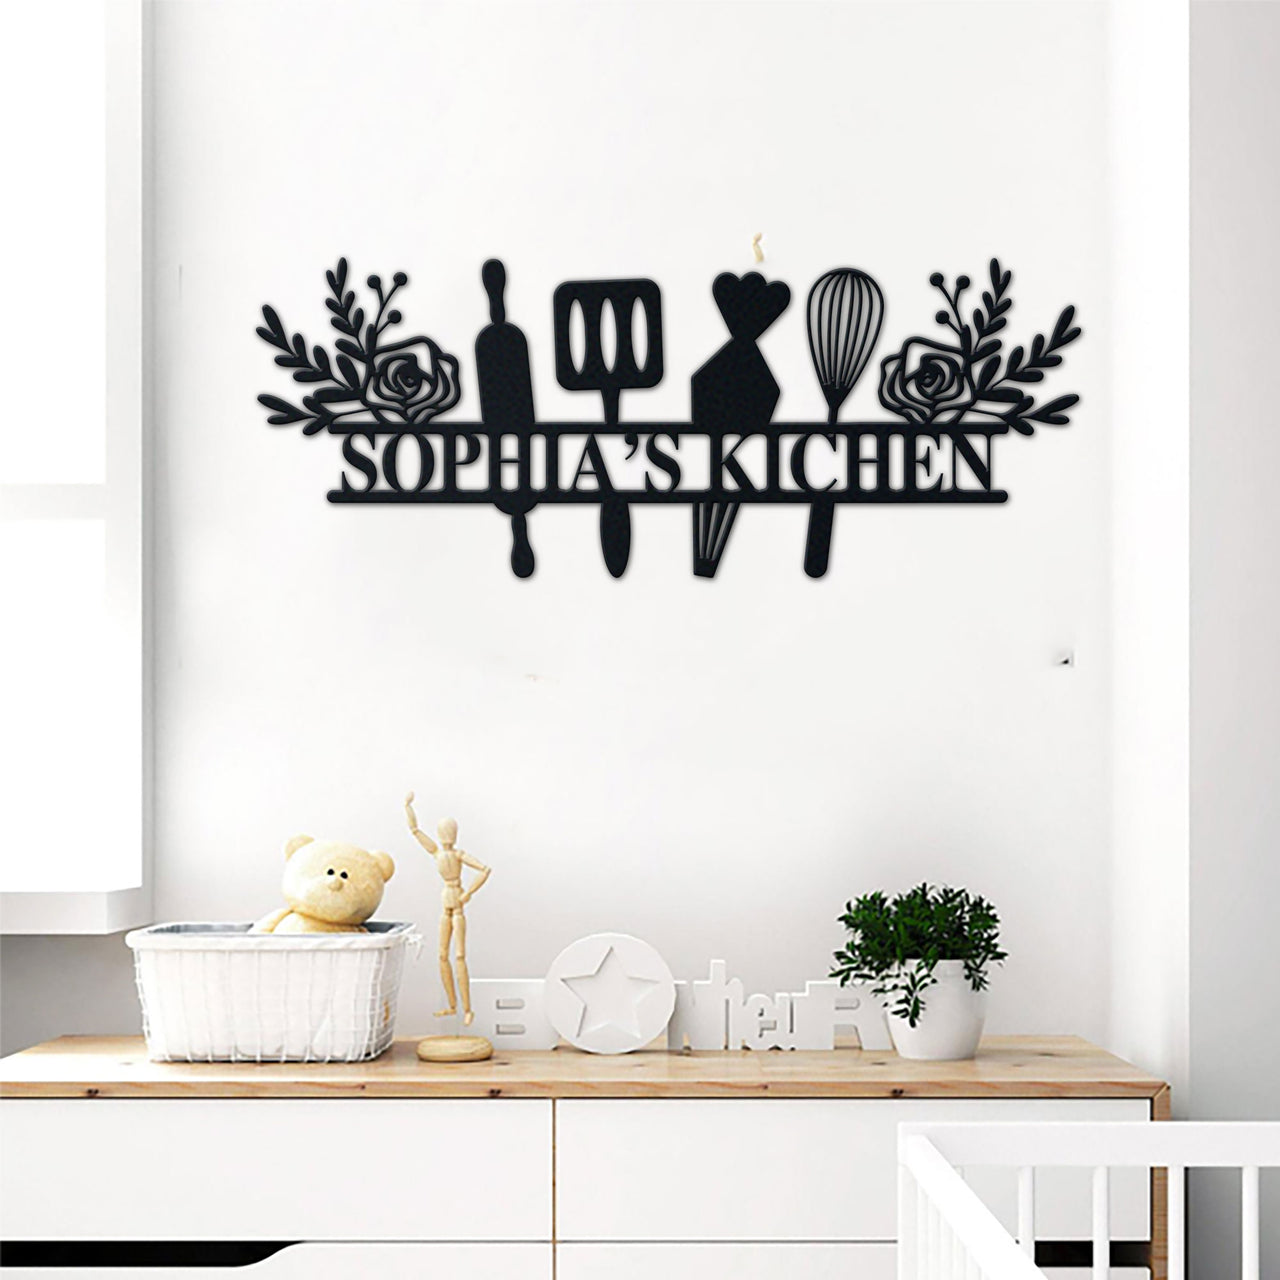 Baking Lovers Metal Wall Art Love Kitchen Personalized Idea For Wall Decoration